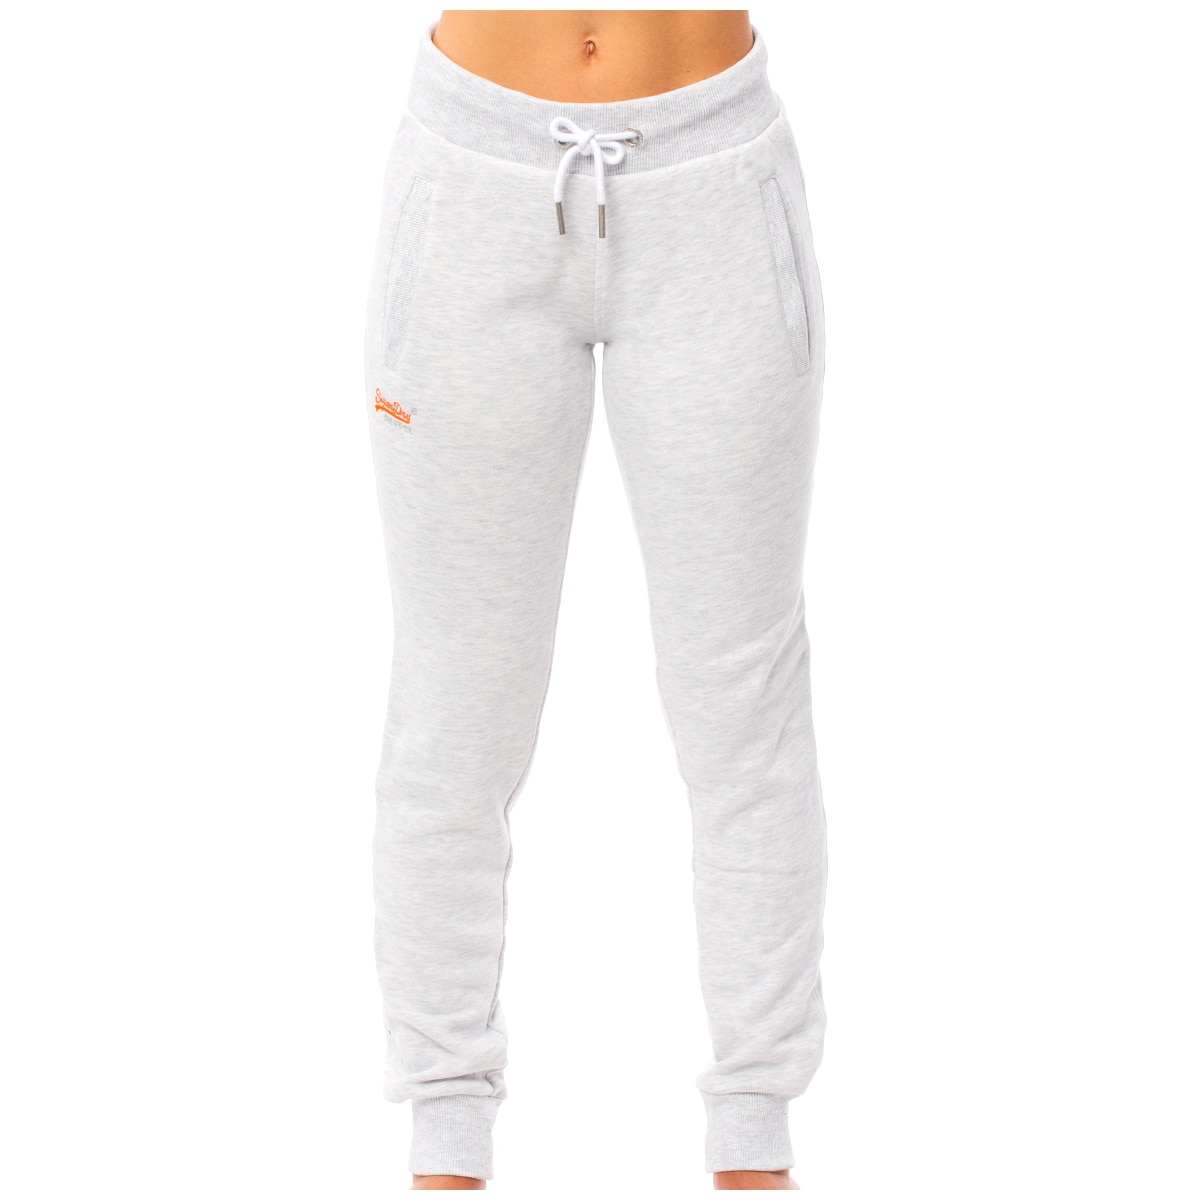 Superdry Women's Pant - Ice Marle